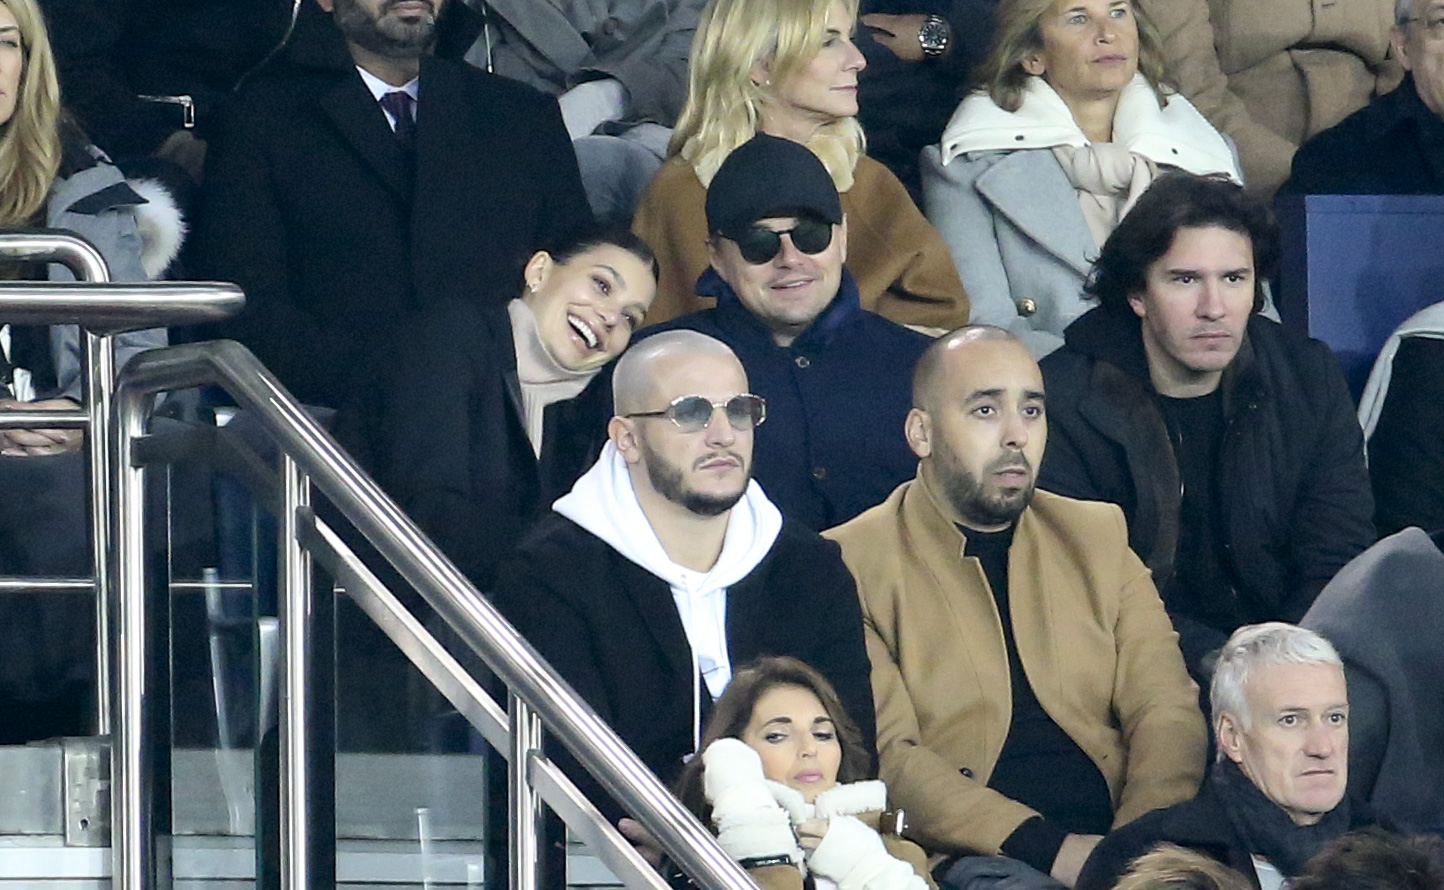 Camila Morrone and her boyfriend Leonardo DiCaprio, with DJ Snake below them, at the UEFA Champions League Group C match at Parc des Princes stadium on November 28, 2018, in Paris, France | Source: Getty Images